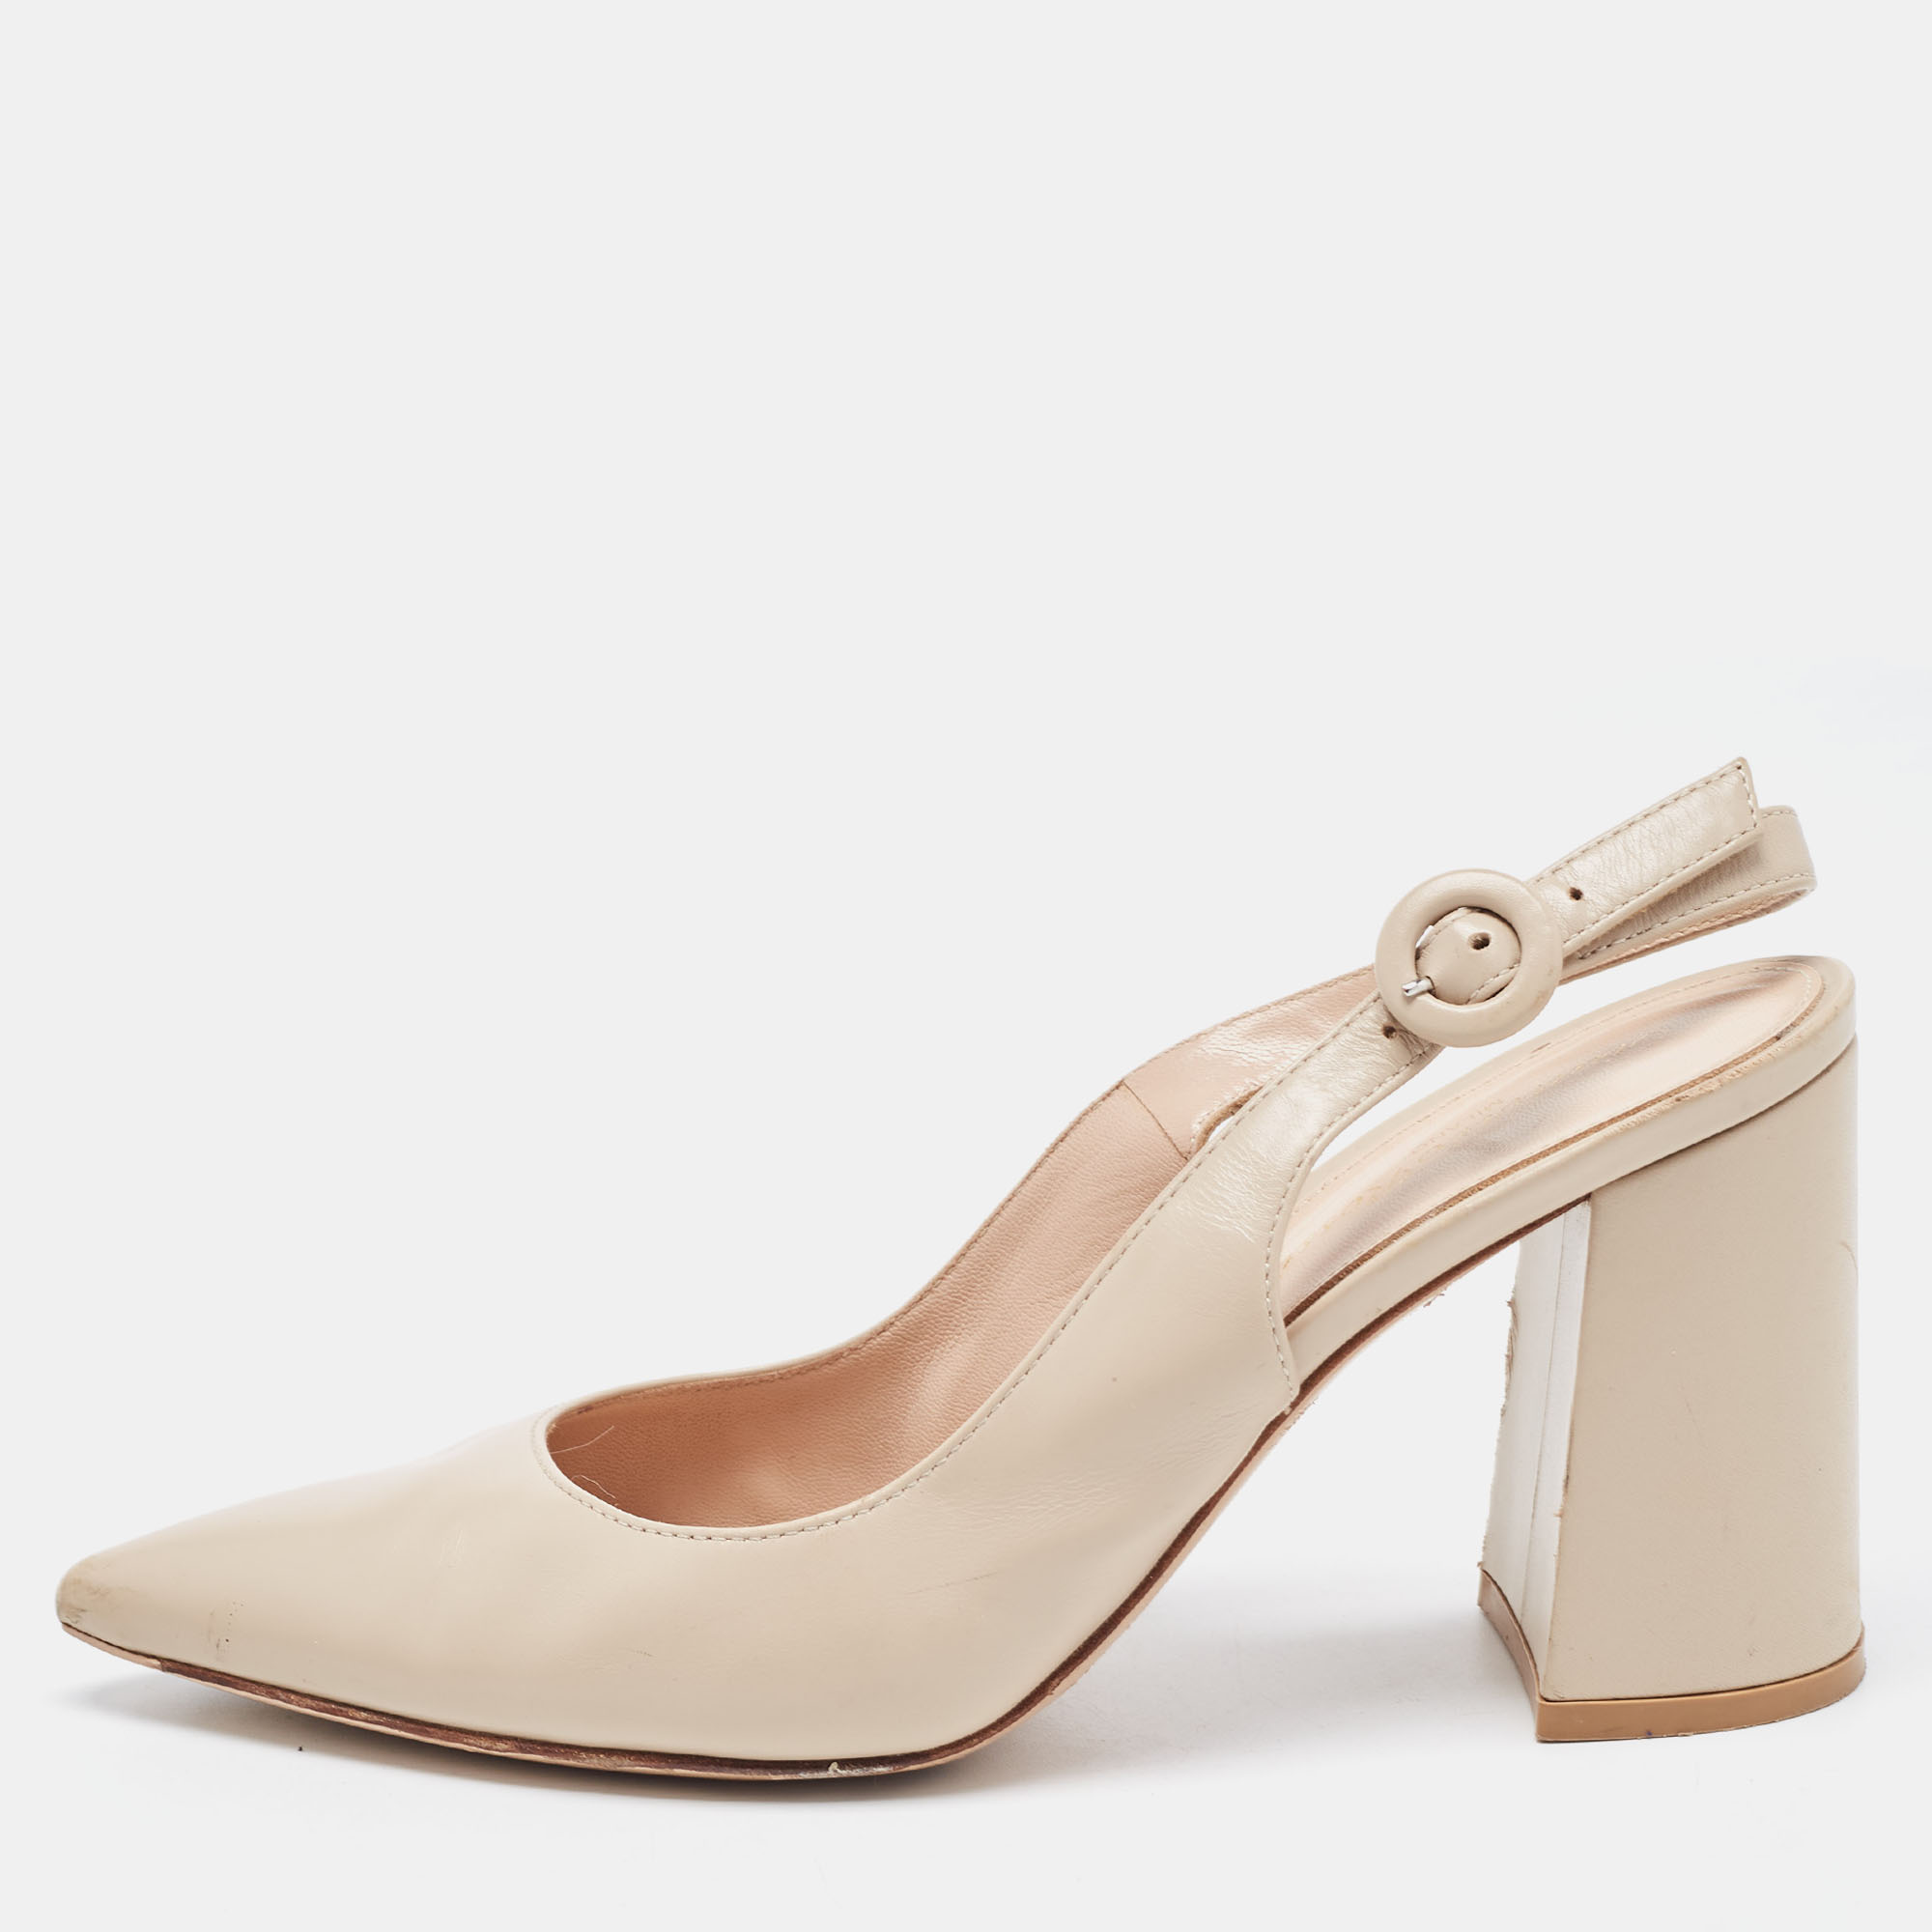 Gianvito rossi beige leather slingback pumps size 36.5